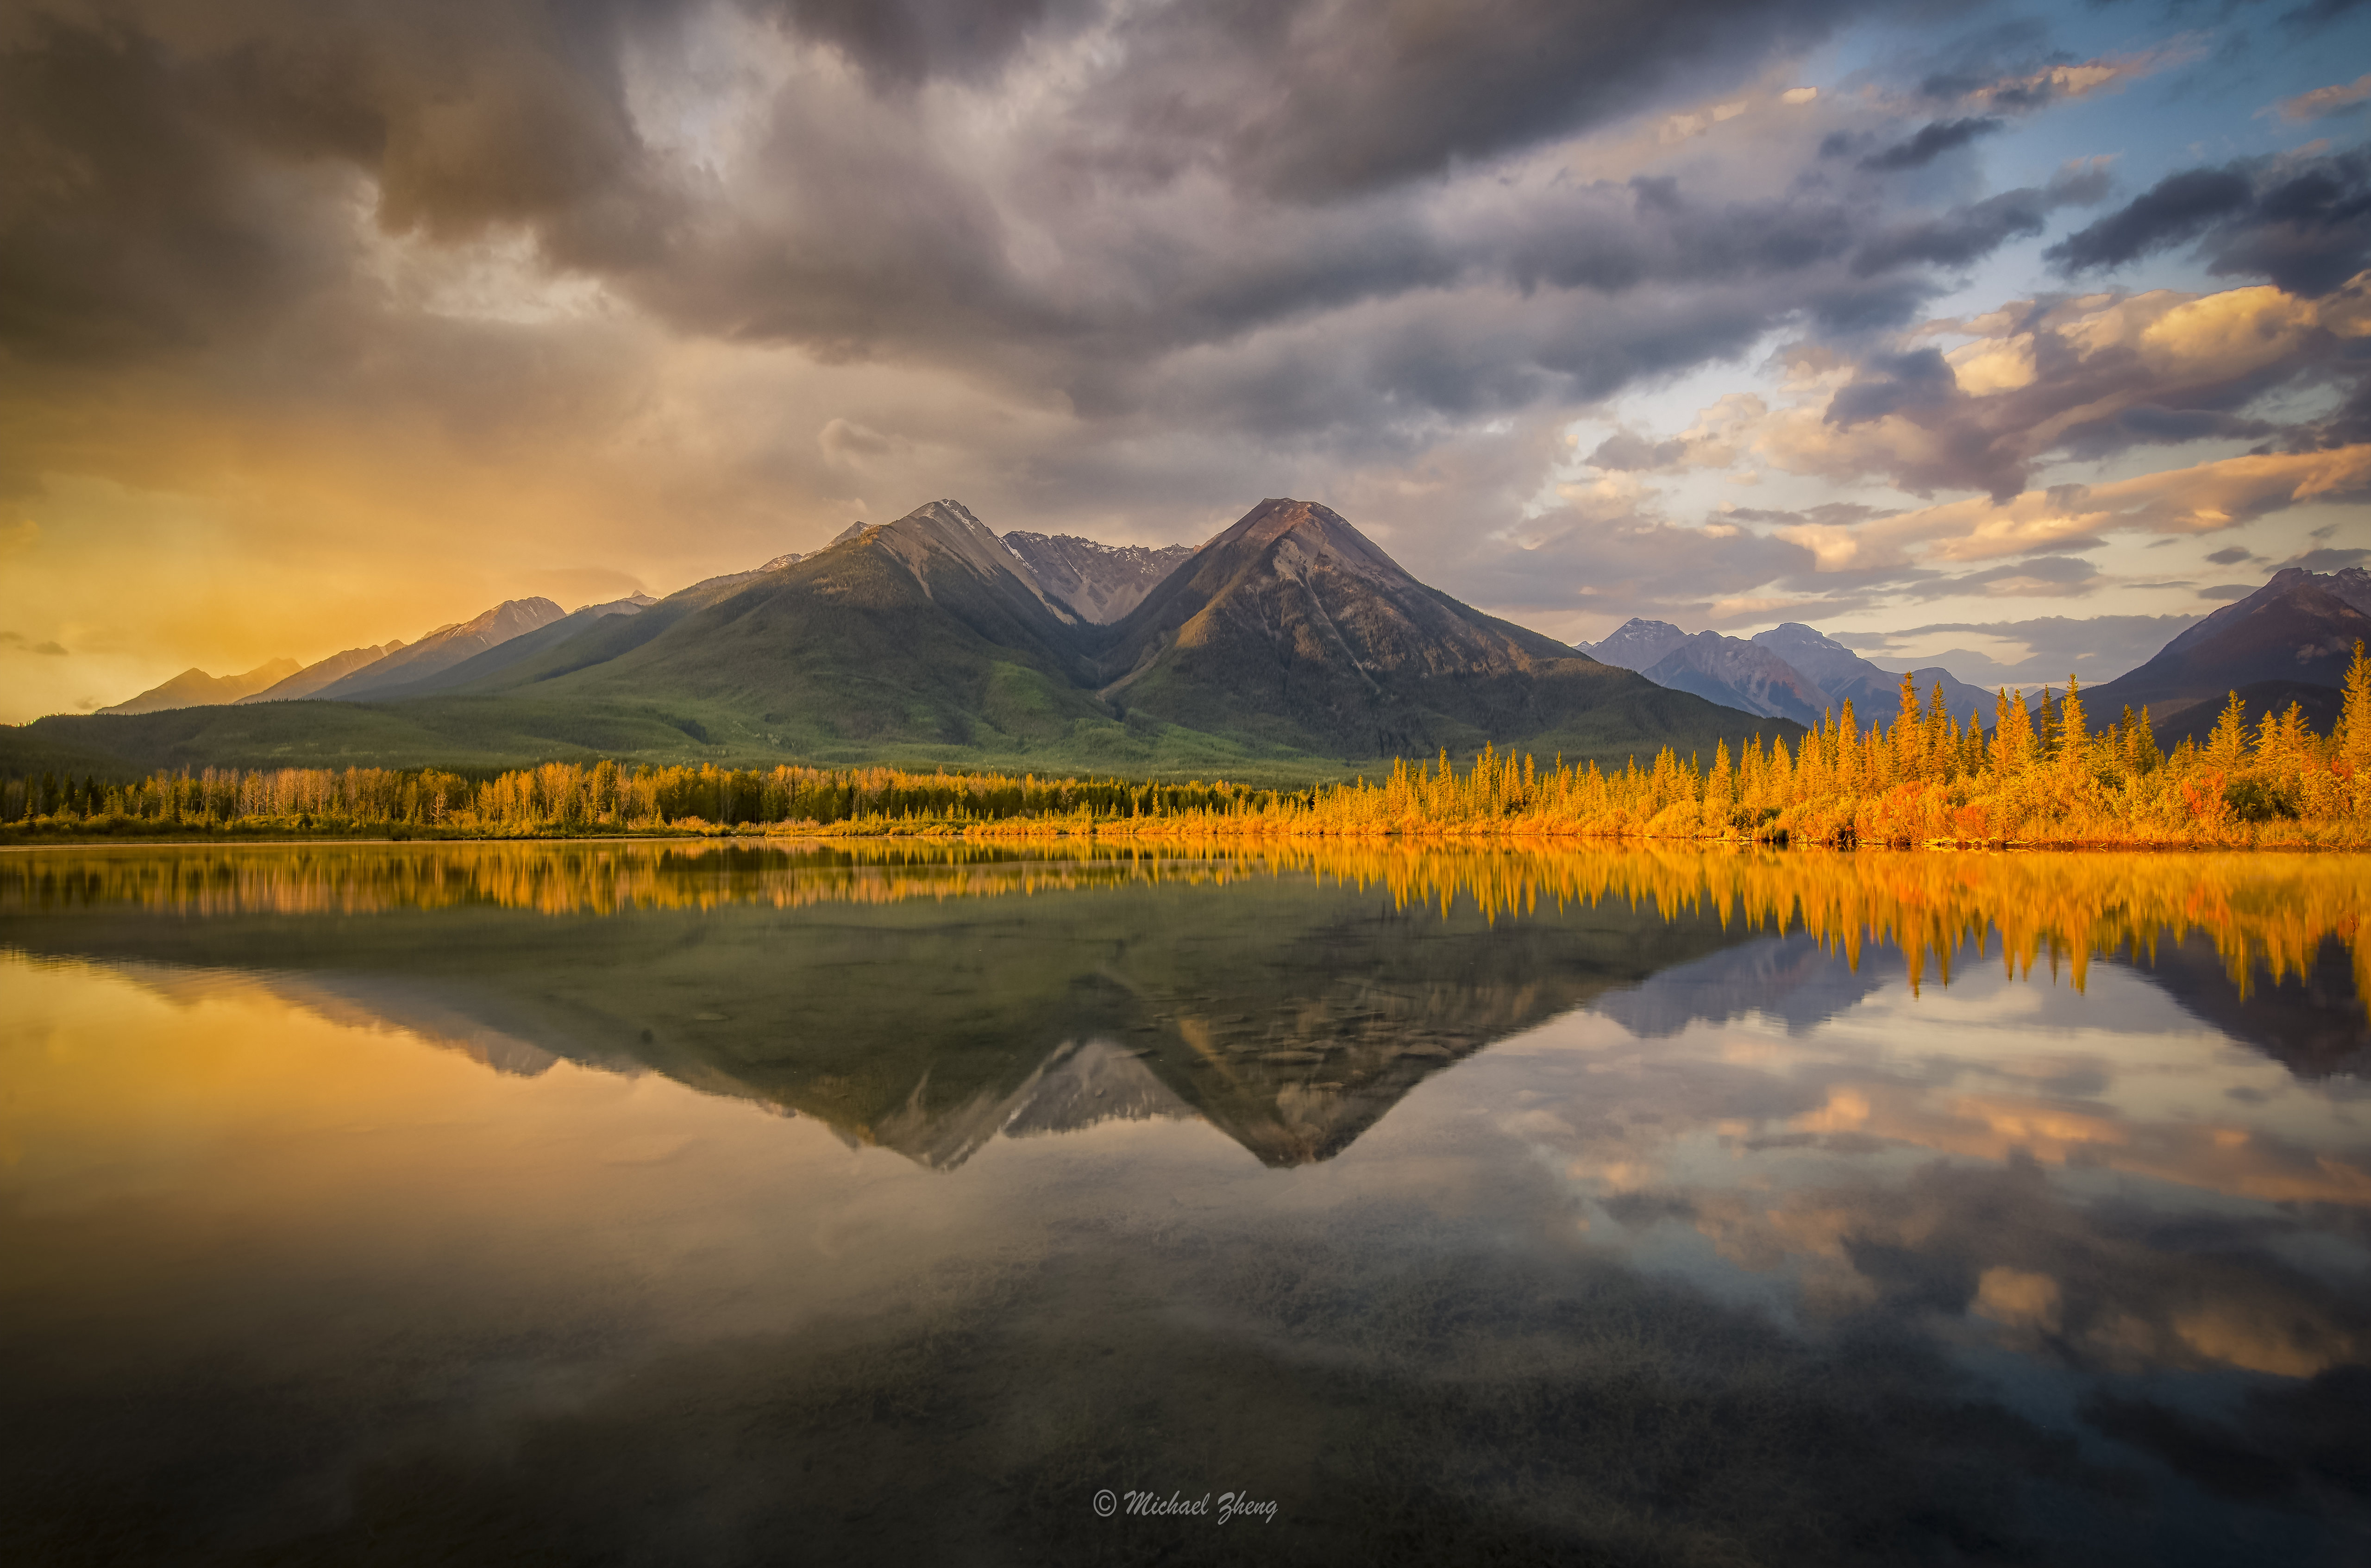 General 5120x3386 Vermillion Lake sunrise landscape reflection mountain view water sunlight clouds sky mountains nature watermarked photography